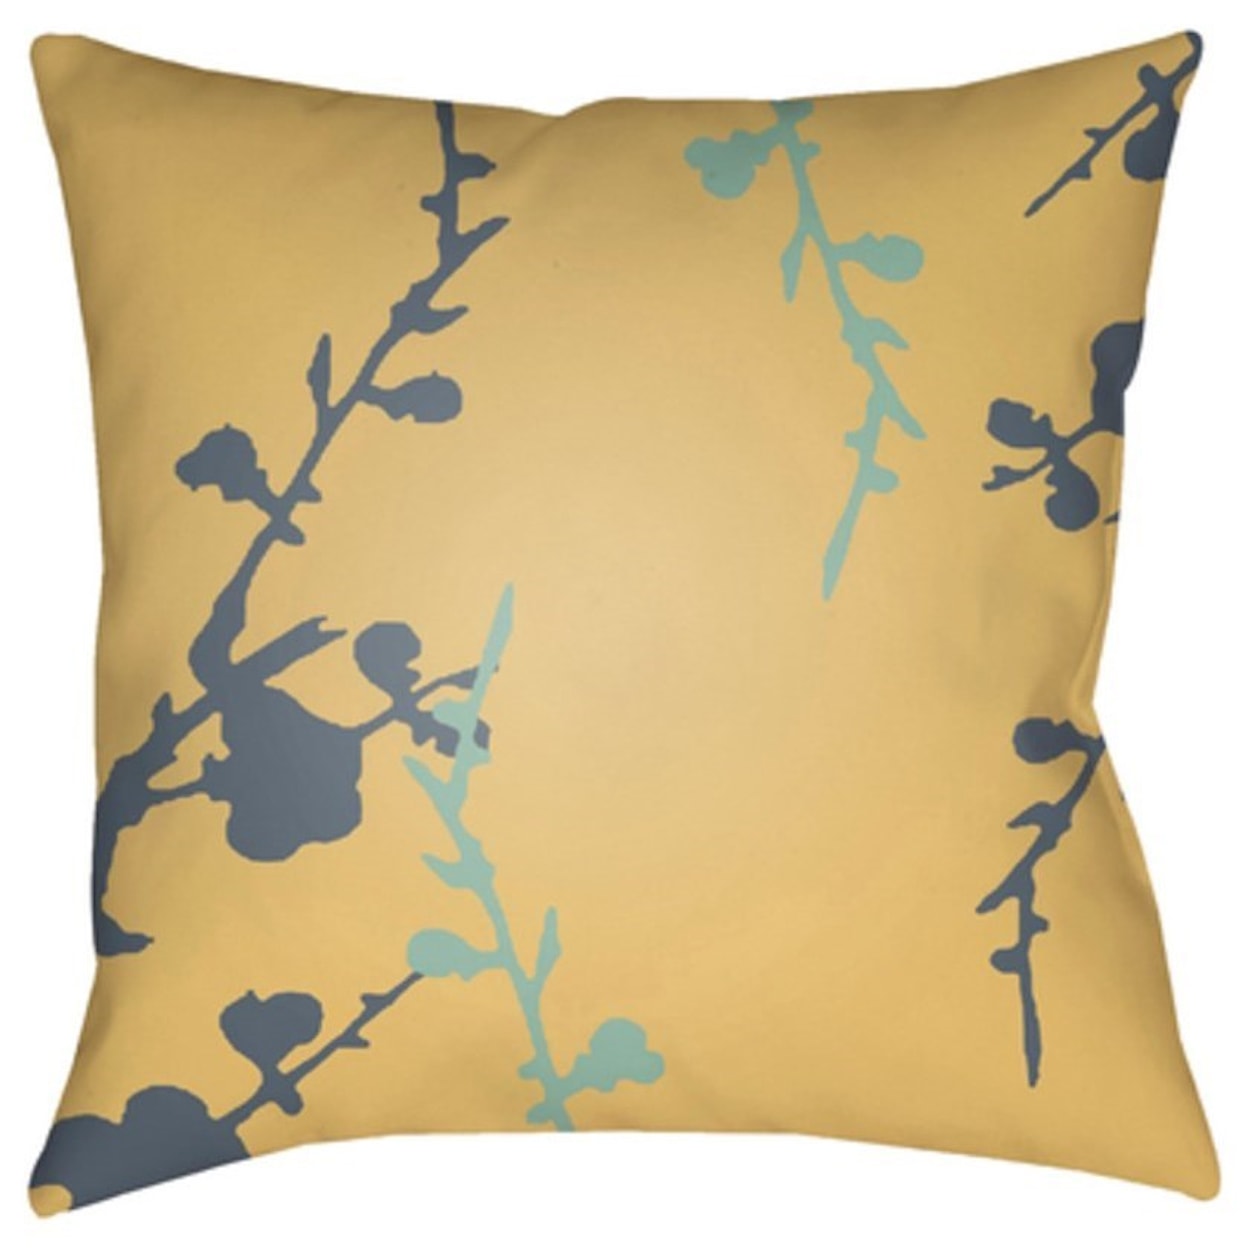 Ruby-Gordon Accents Chinoiserie Floral Pillow